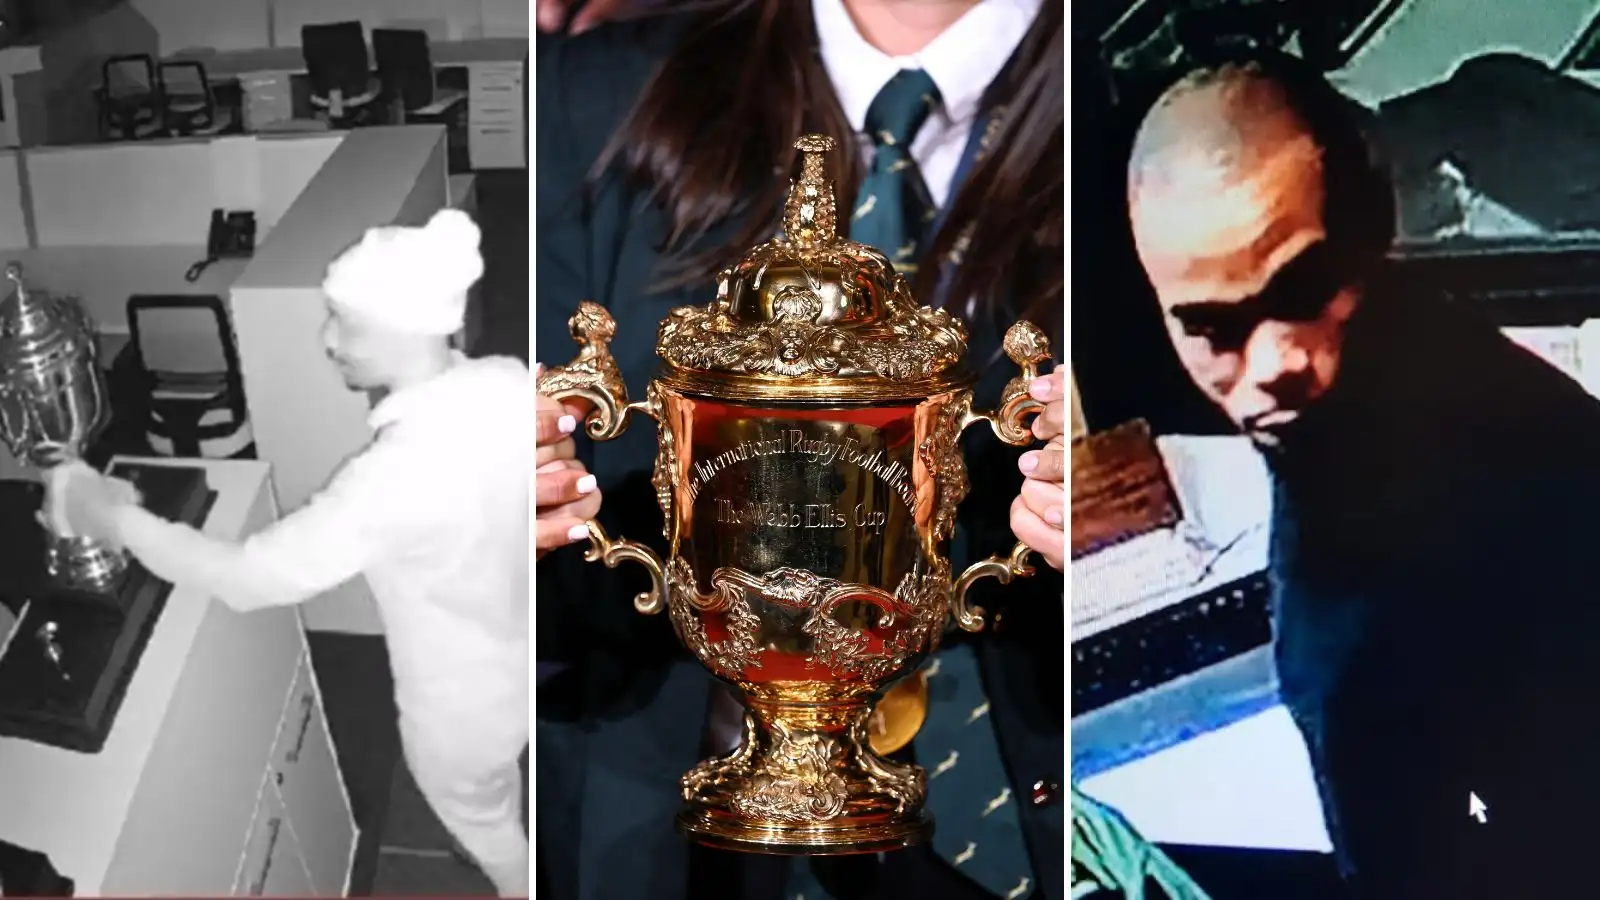 Screenshots of SARU House being robbed and a picture of the William Webb Ellis Cup.